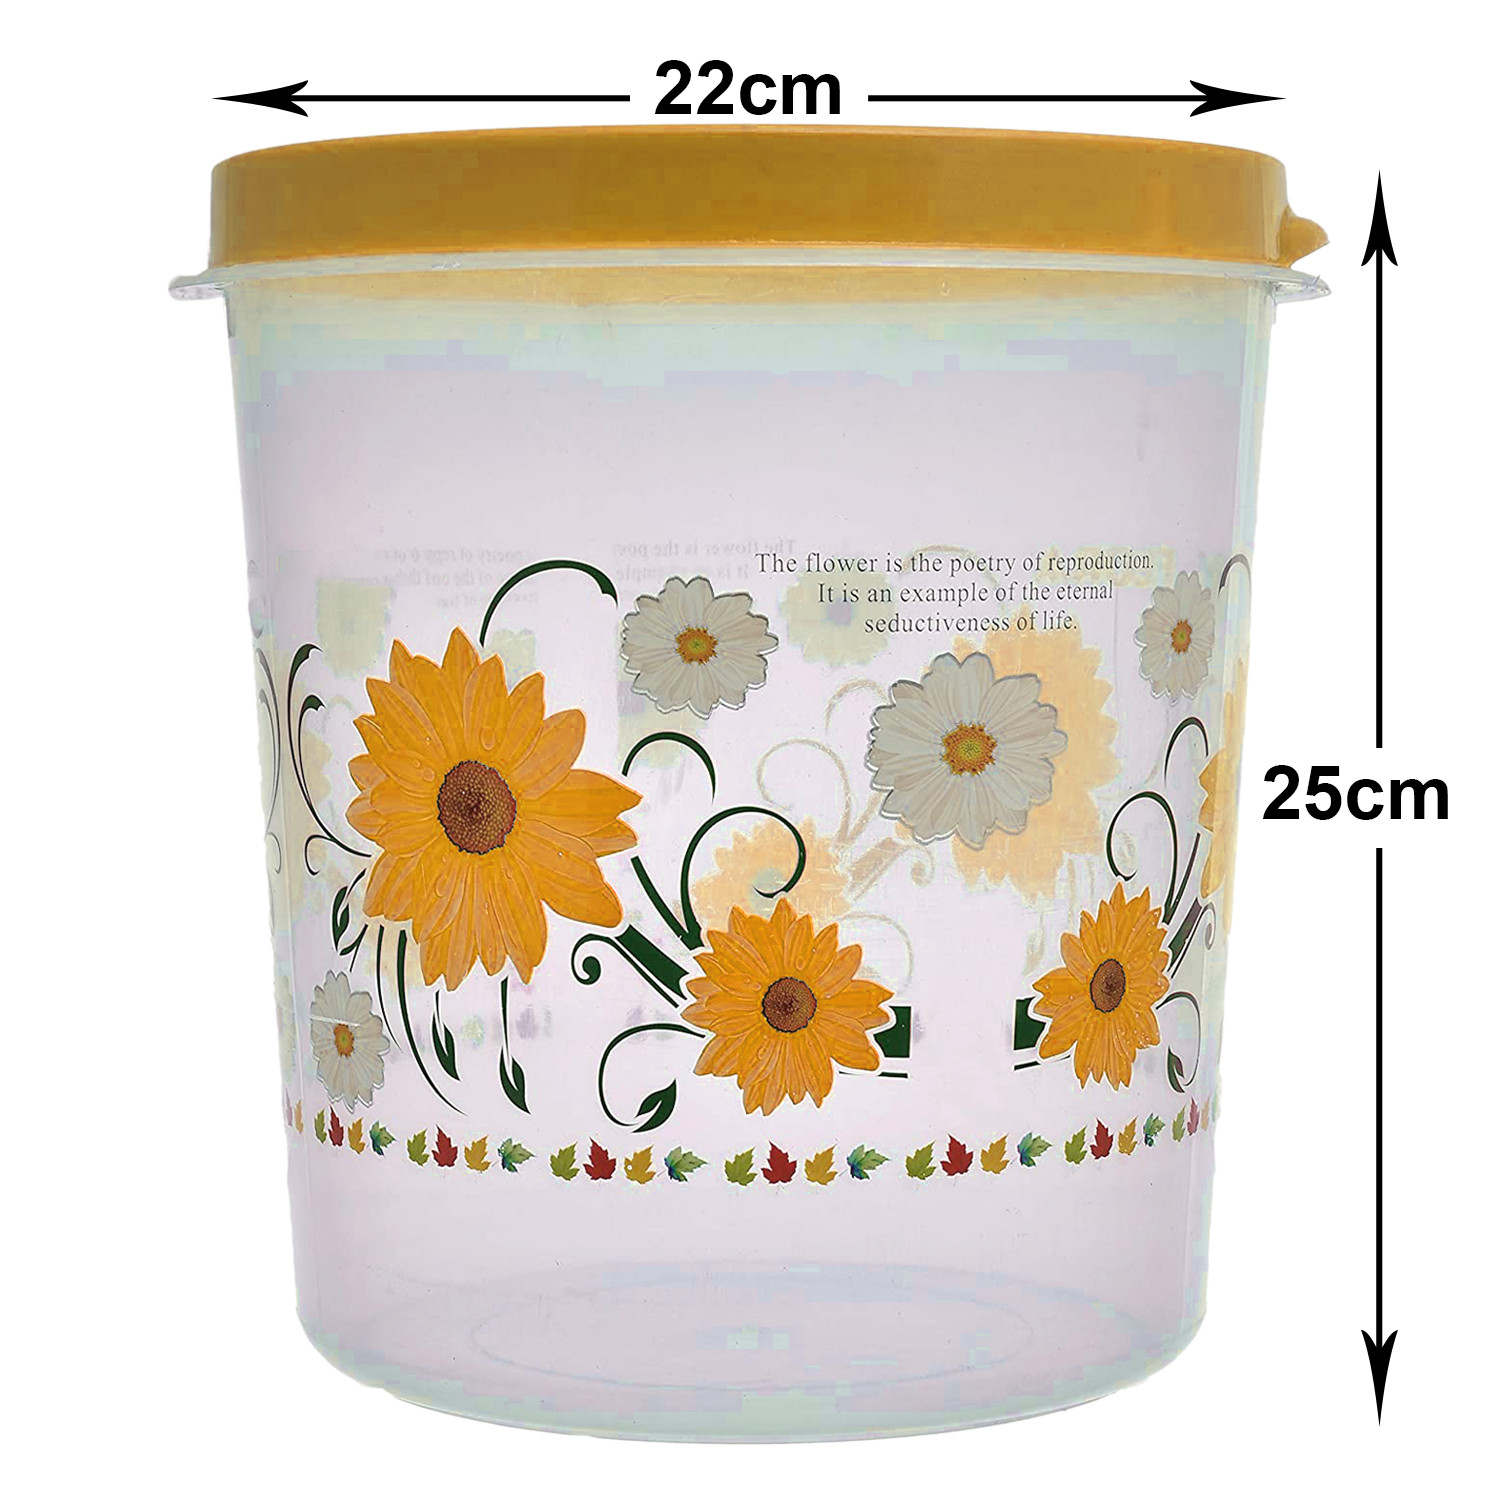 Kuber Industries Storage Container|Durable Plastic Floral Design BPA Free Food Kitchen Organizer With Lid|Food Utility Jar, 7 Ltr (Yellow)